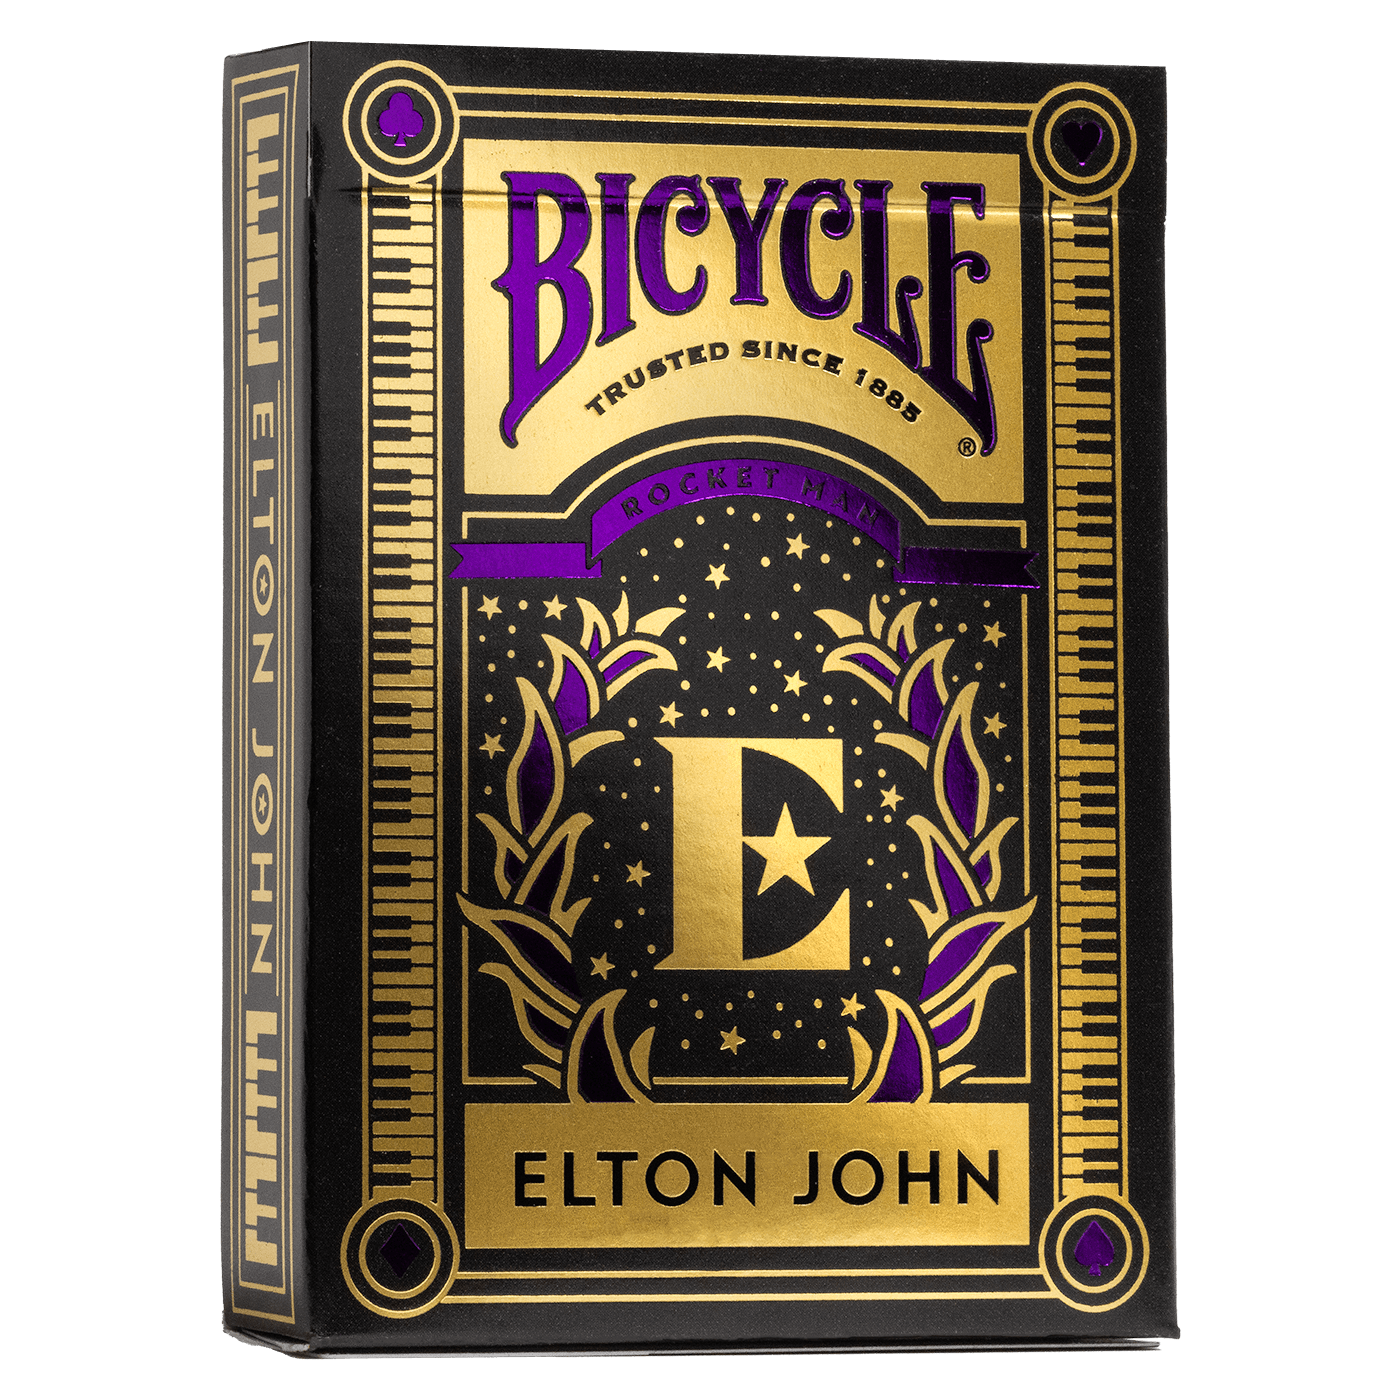 Elton John Playing Cards - By Bicycle and the Rocket Man Himself!